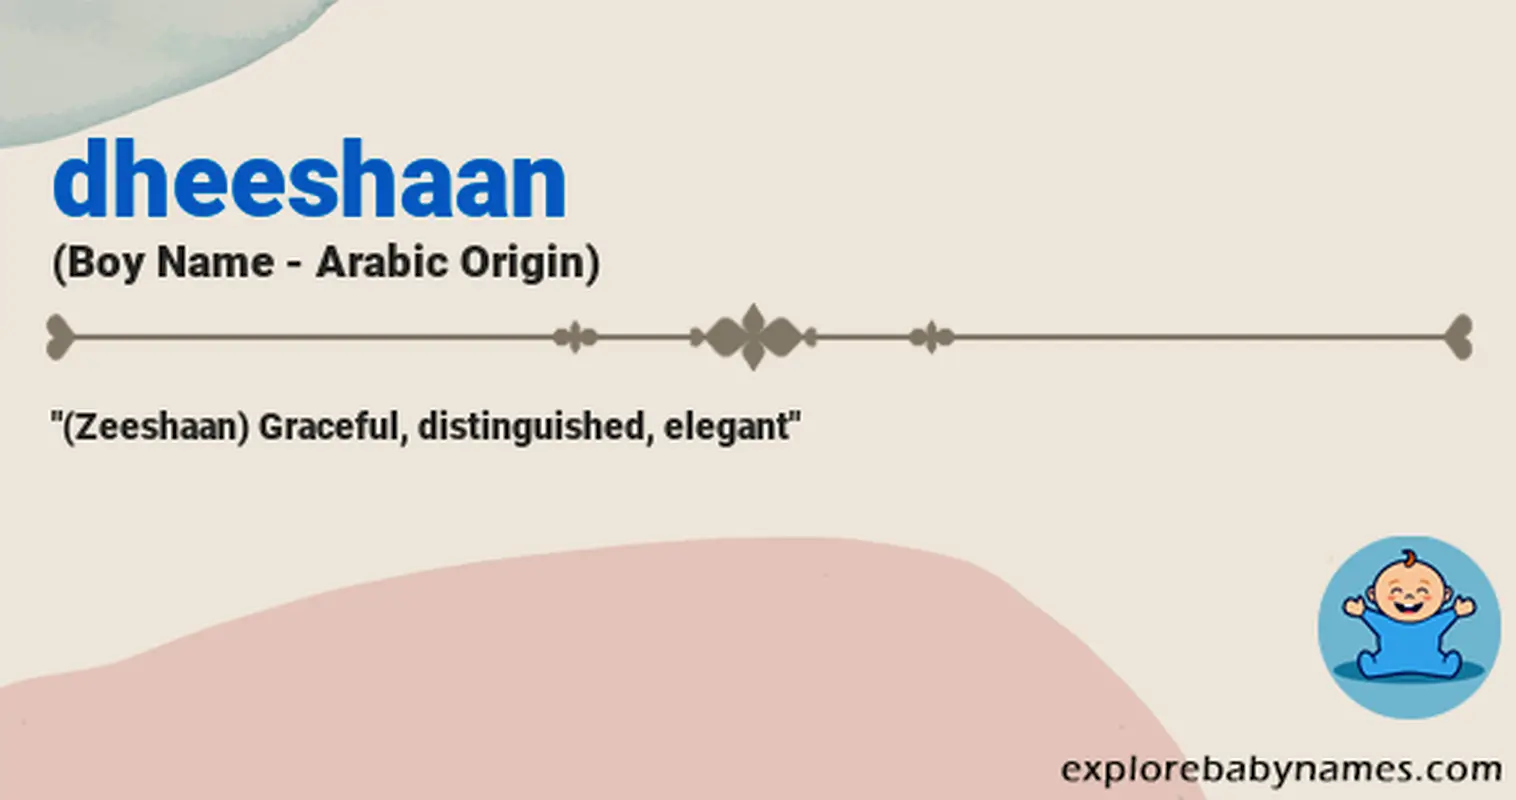 Meaning of Dheeshaan